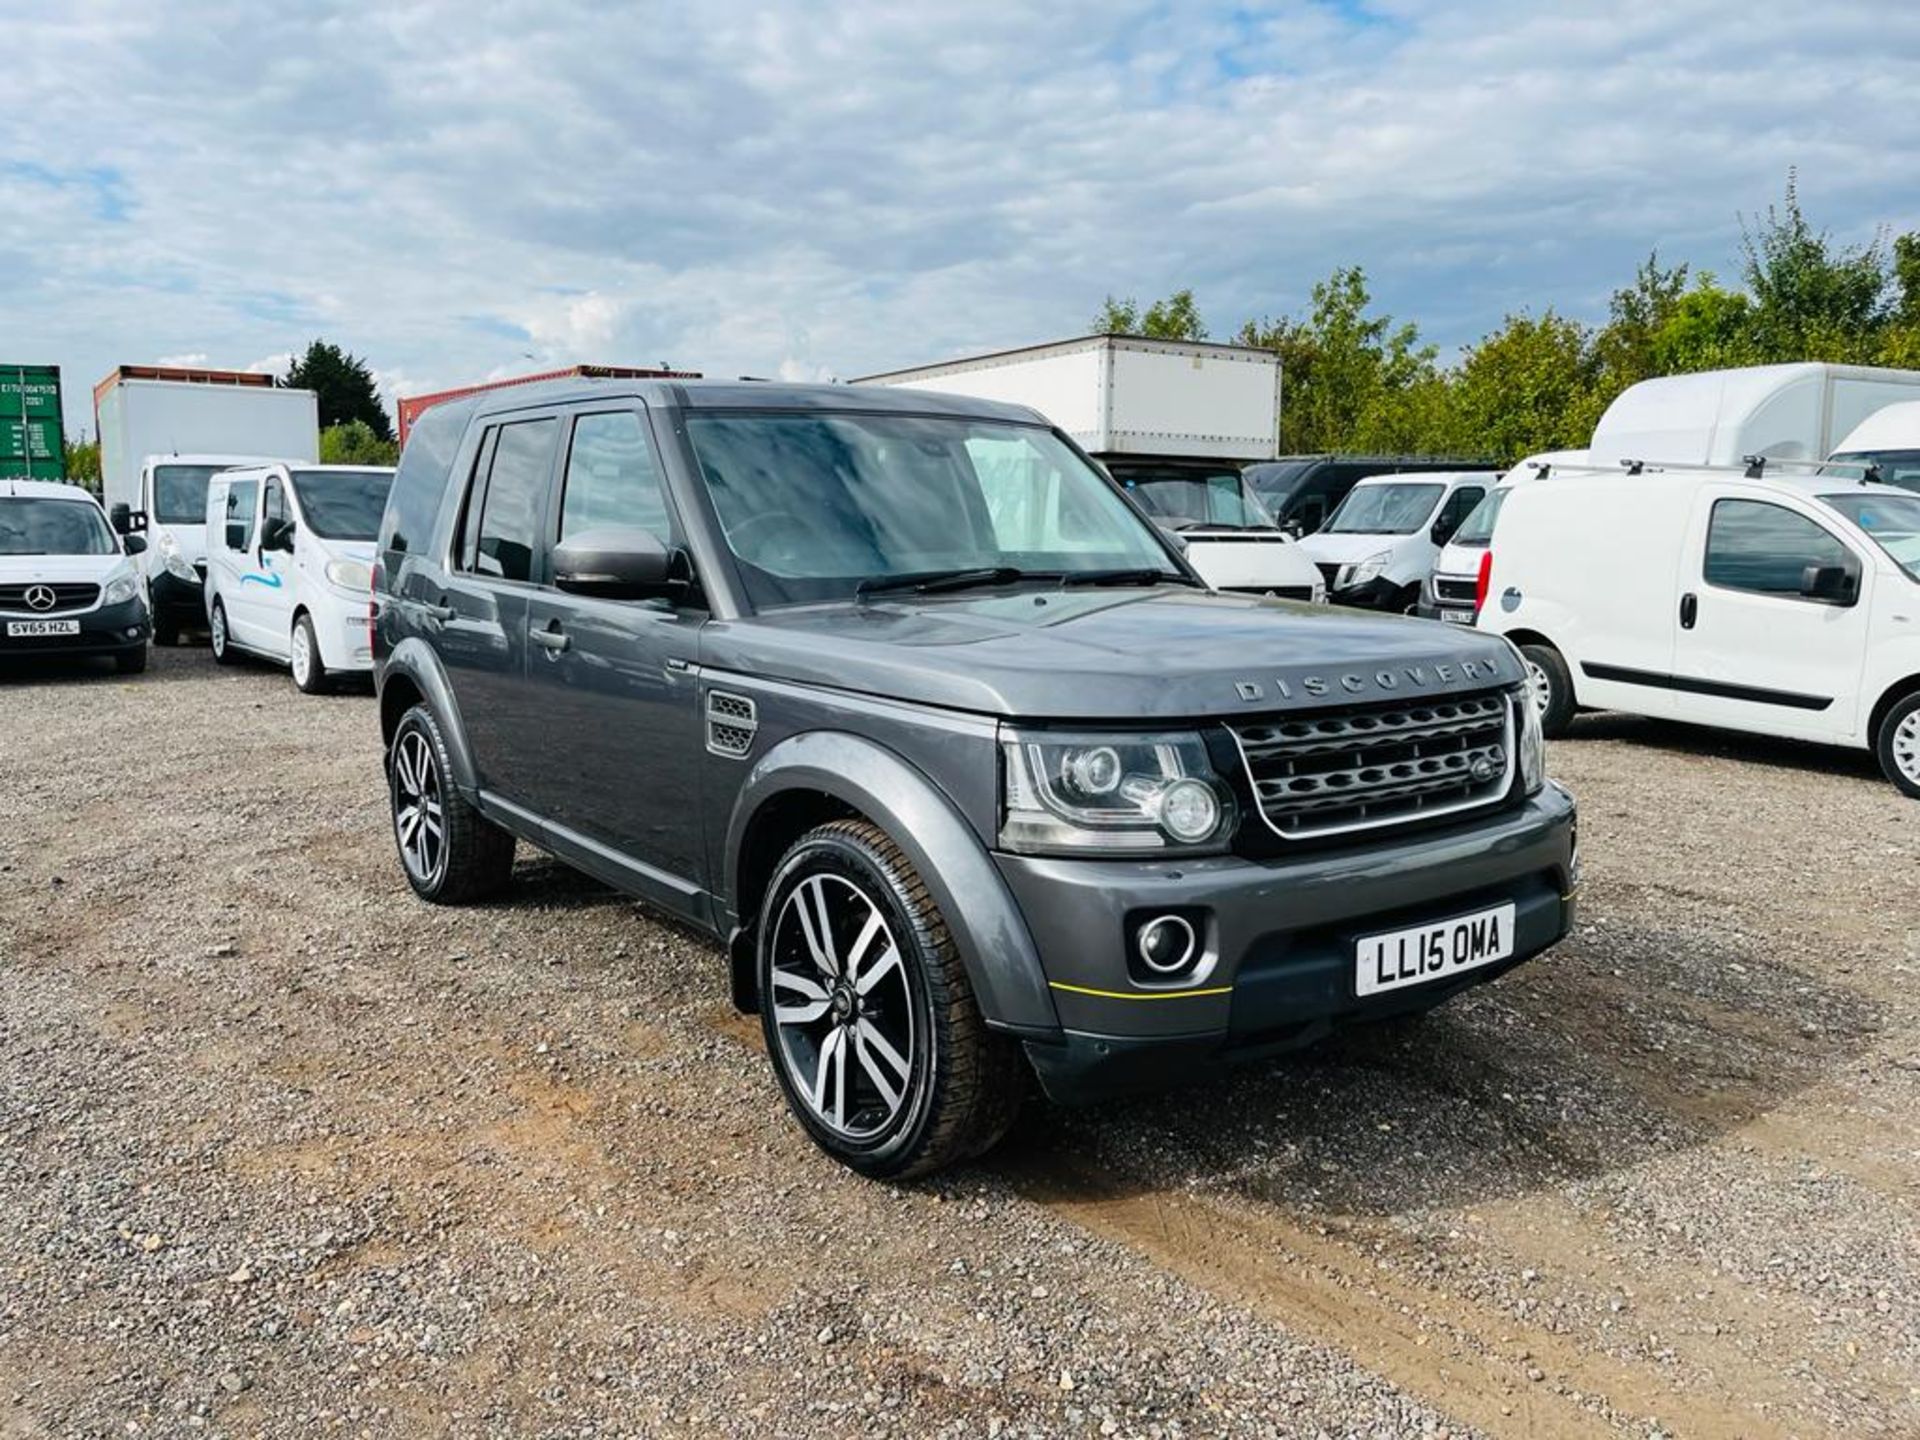 ** ON SALE **Land Rover Discovery 4 XS 3.0 SDV6 CommandShift Auto Commercial 2015 '65 Reg' - Sat Nav